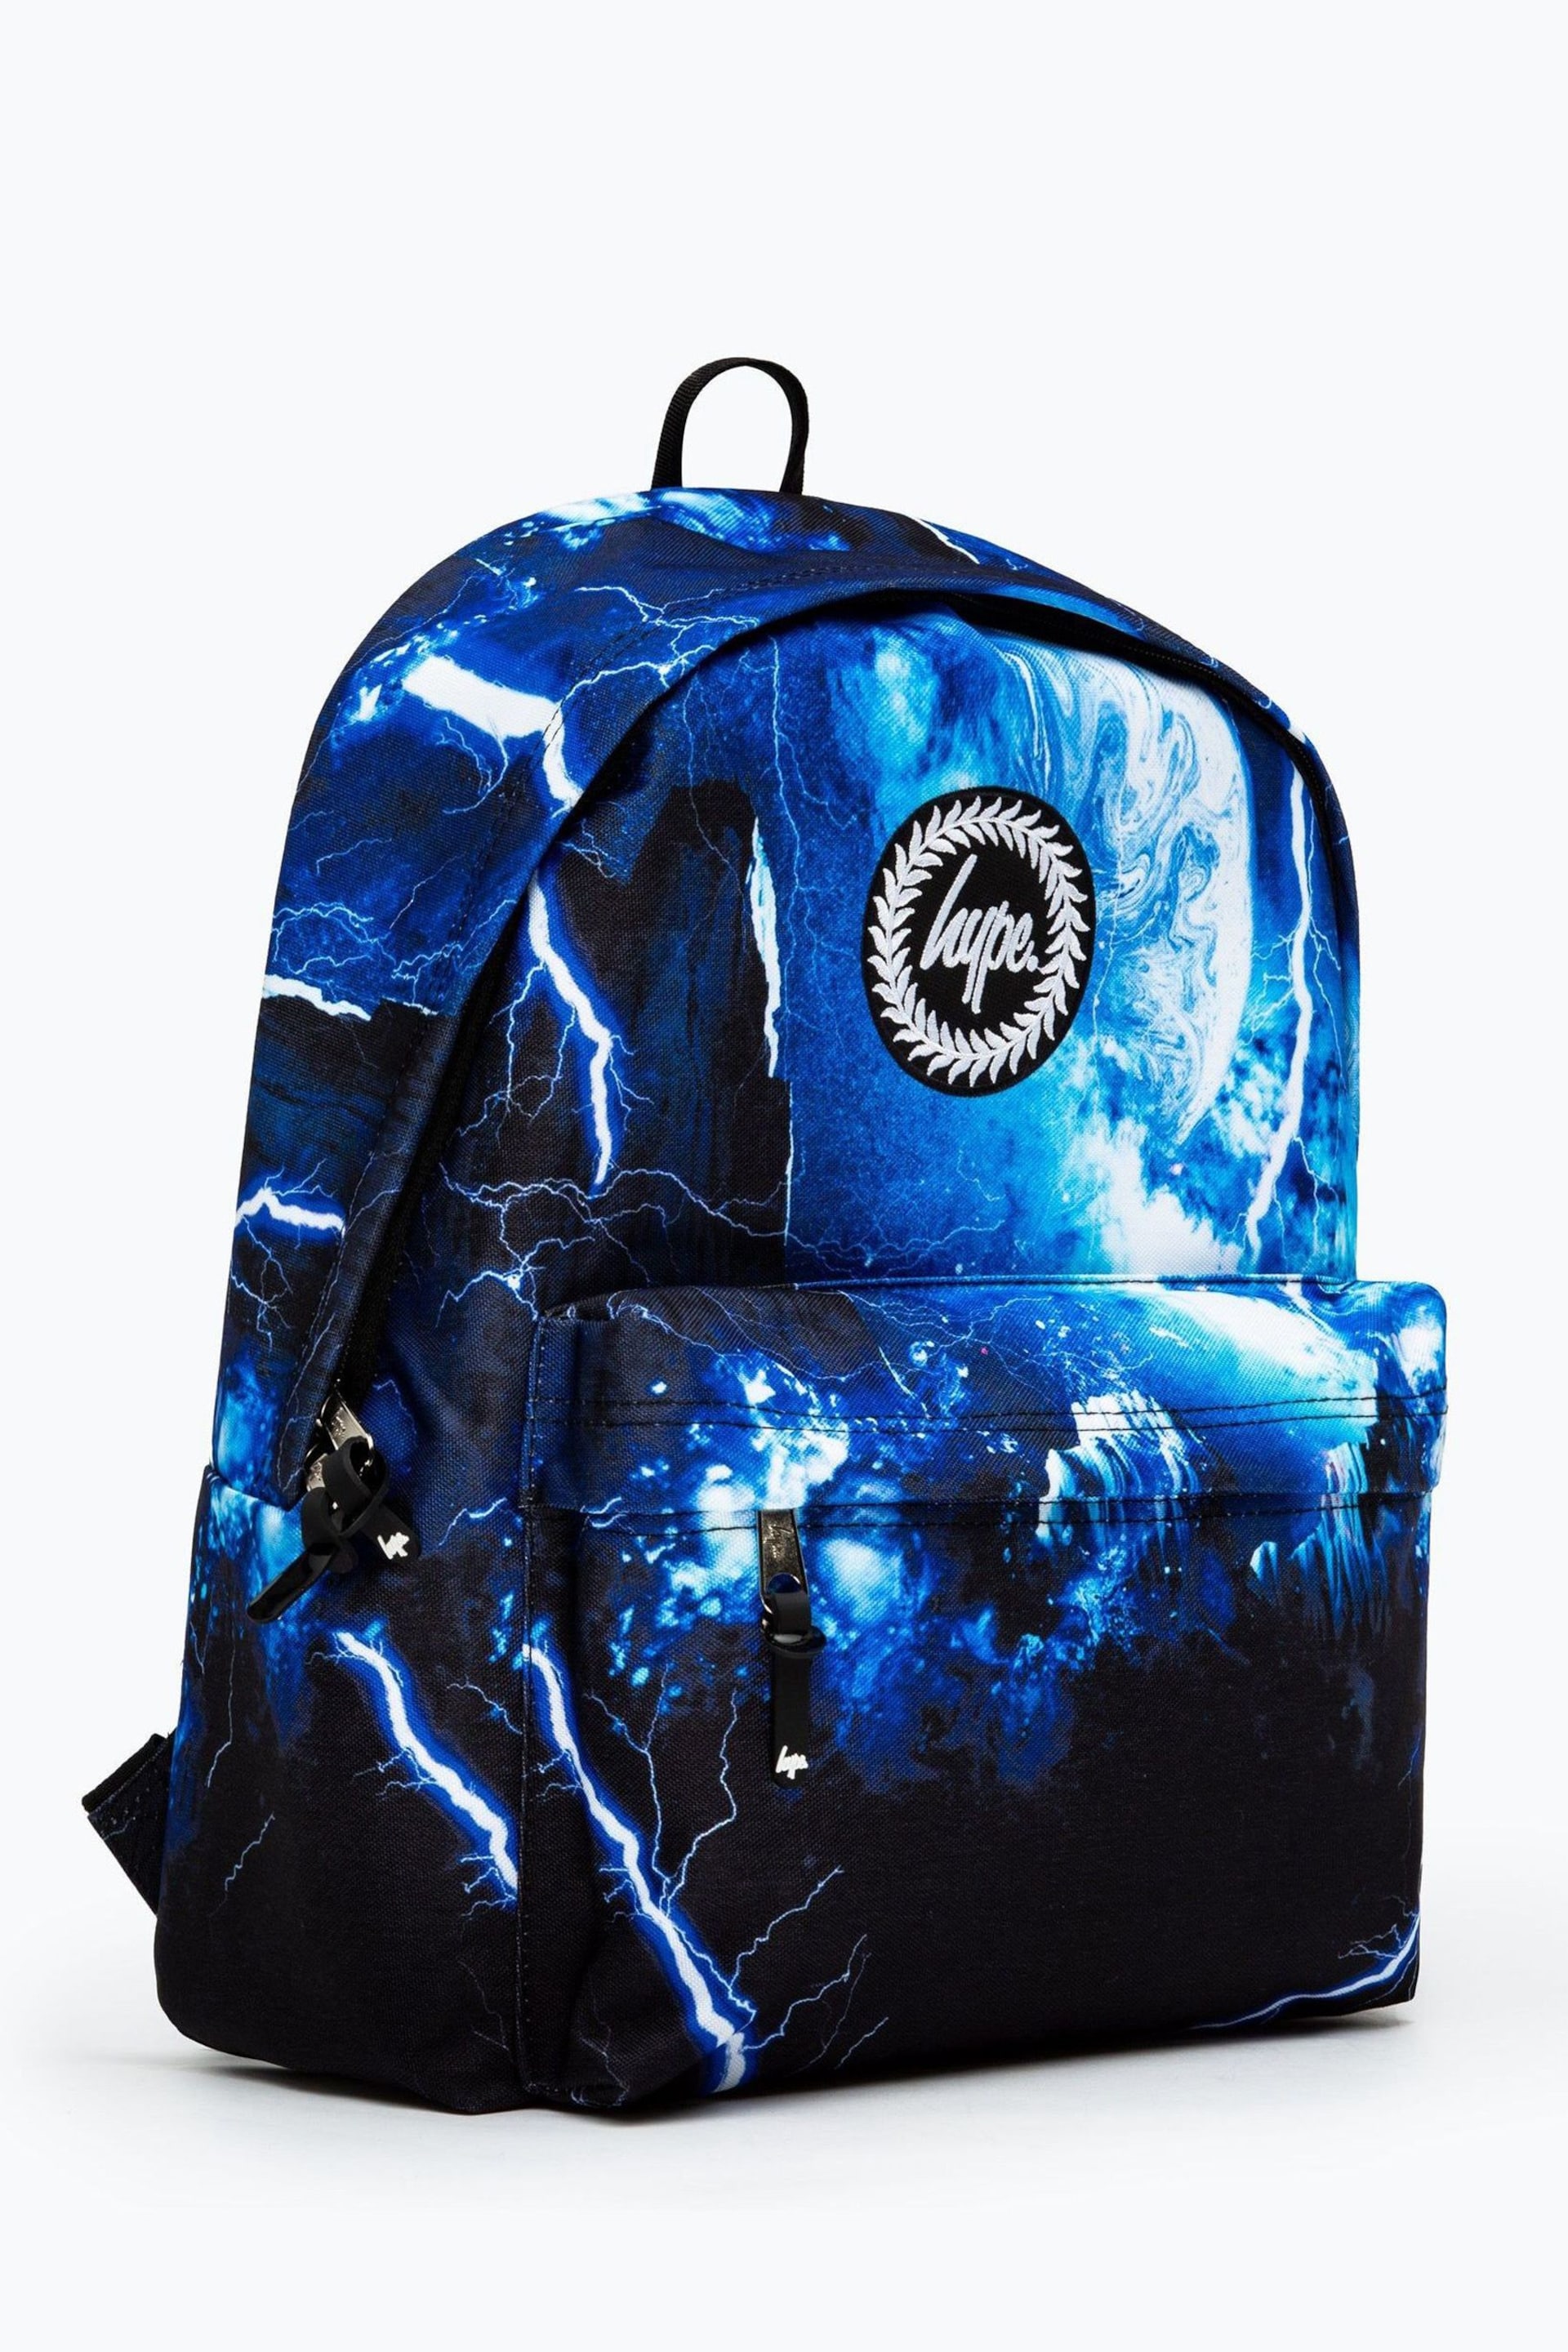 Hype. Blue Galaxy Lightning Backpack - Image 2 of 9